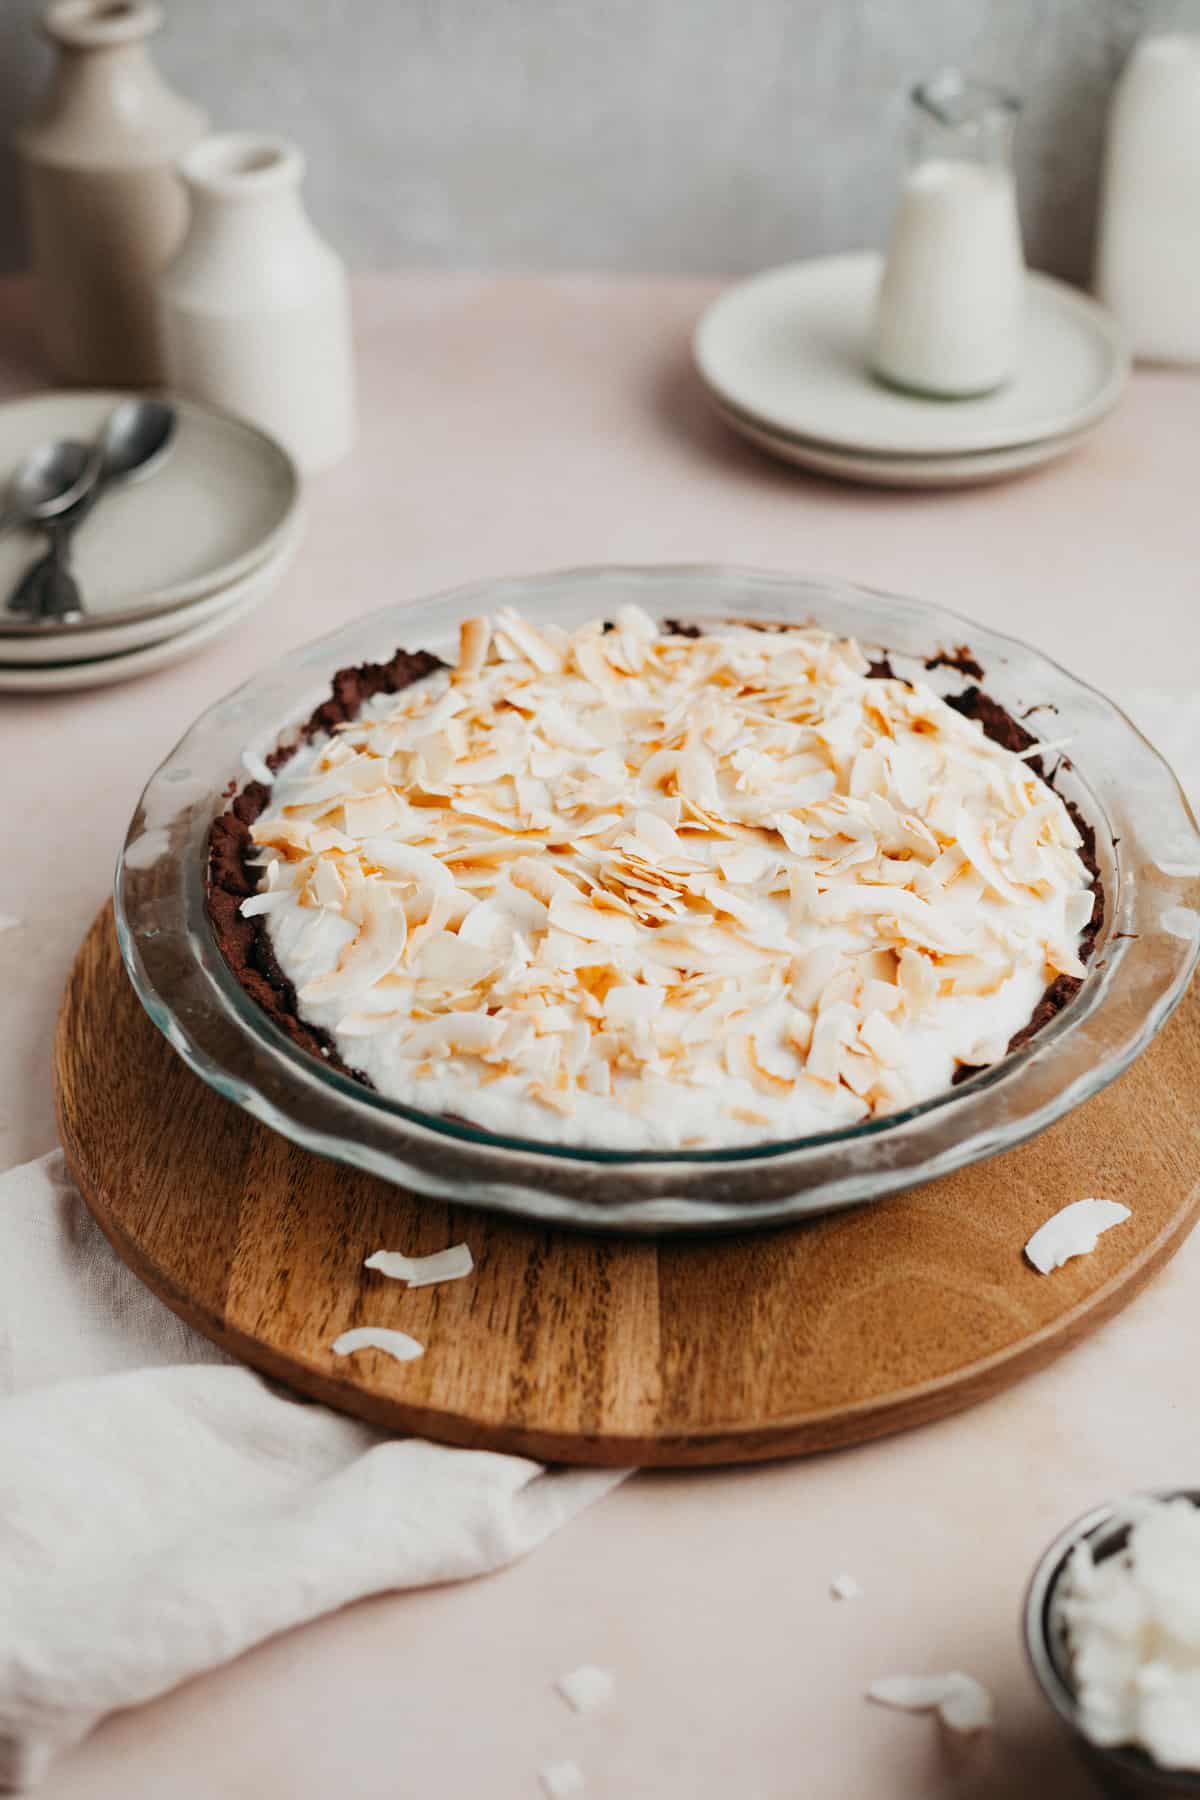 A chocolate pie topped with whipped cream and toasted coconut in a pyrex pie plate.